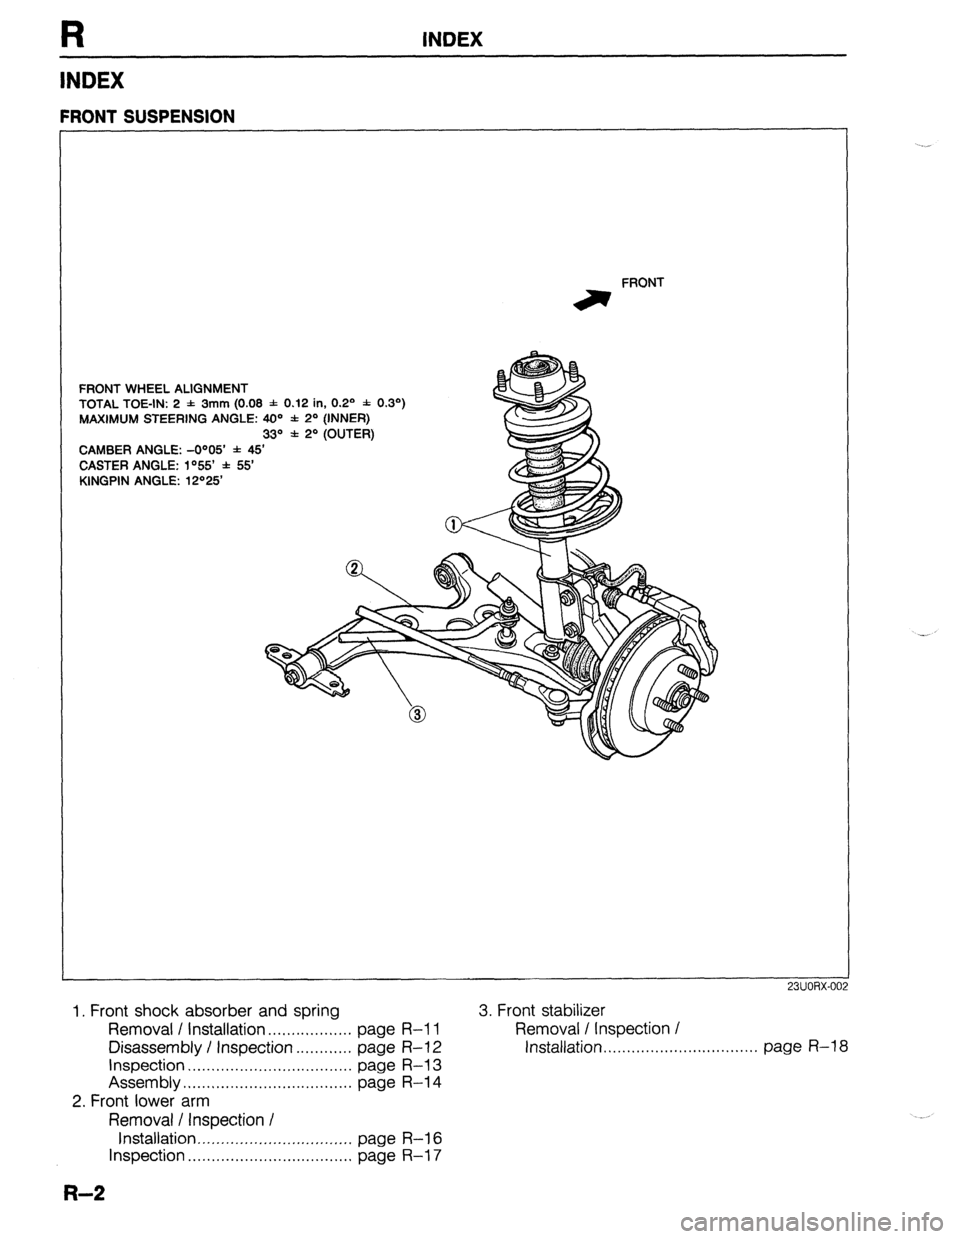 MAZDA PROTEGE 1992  Workshop Manual R INDEX 
INDEX 
FRONT WHEEL ALIGNMENT 
TOTAL TOE-IN: 2 -1: 3mm (0.08 f 0.12 in, 0.2’ * 0.3’) 
MAXIMUM STEERING ANGLE: 40=’ * 2’ (INNER) 
33“ f 2O (OUTER) 
CAMBER ANGLE: -O”05’ * 45’ 
C